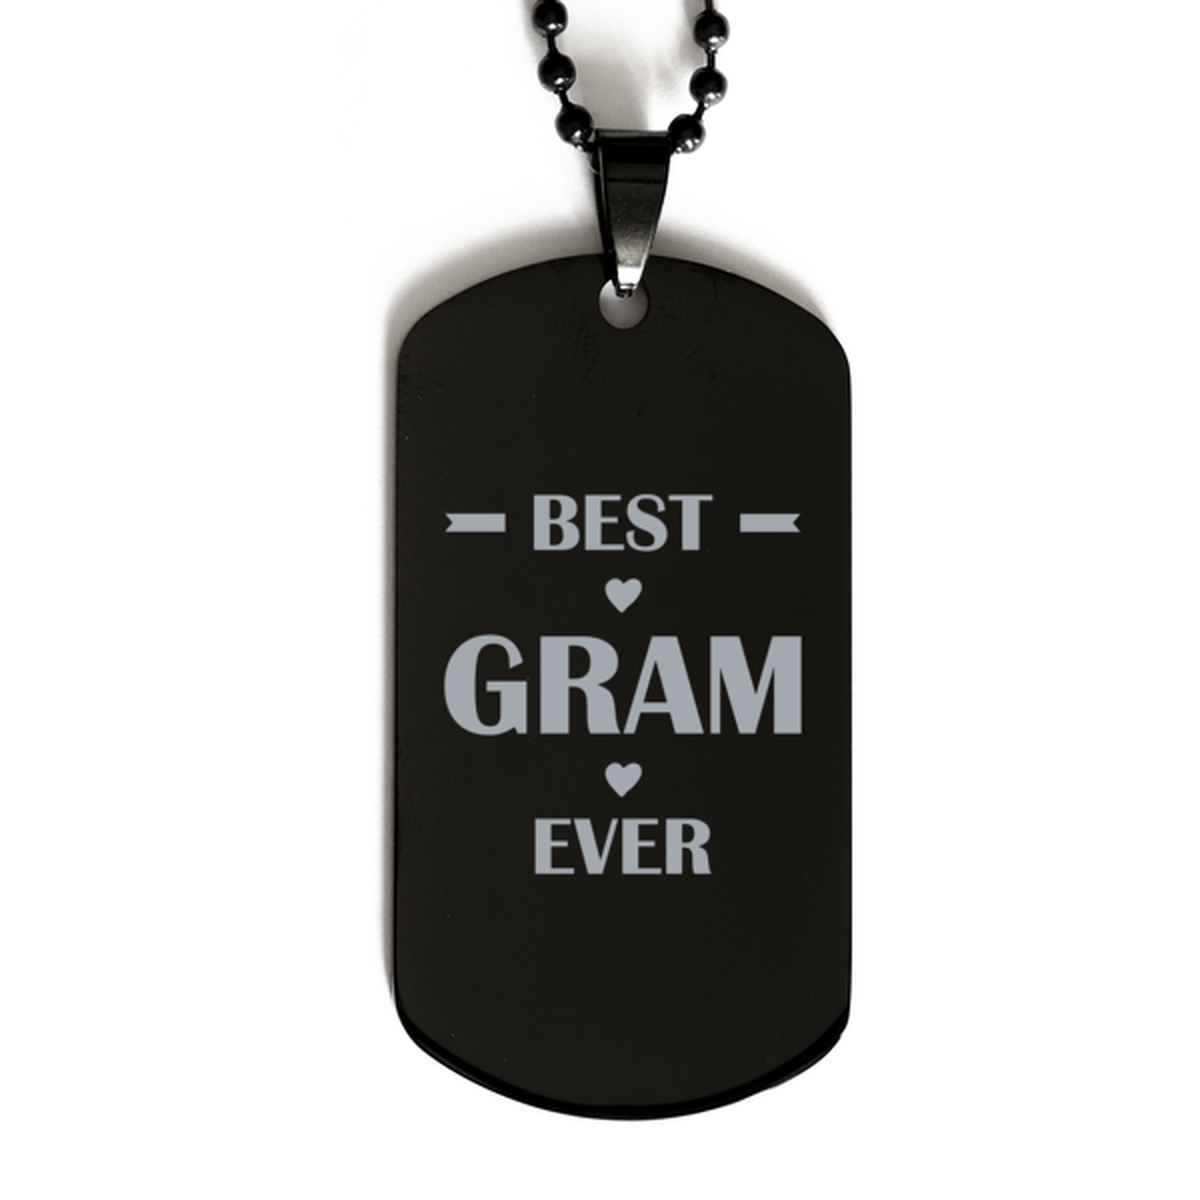 Best Gram Ever Gram Gifts, Funny Black Dog Tag For Gram, Birthday Family Presents Engraved Necklace For Women